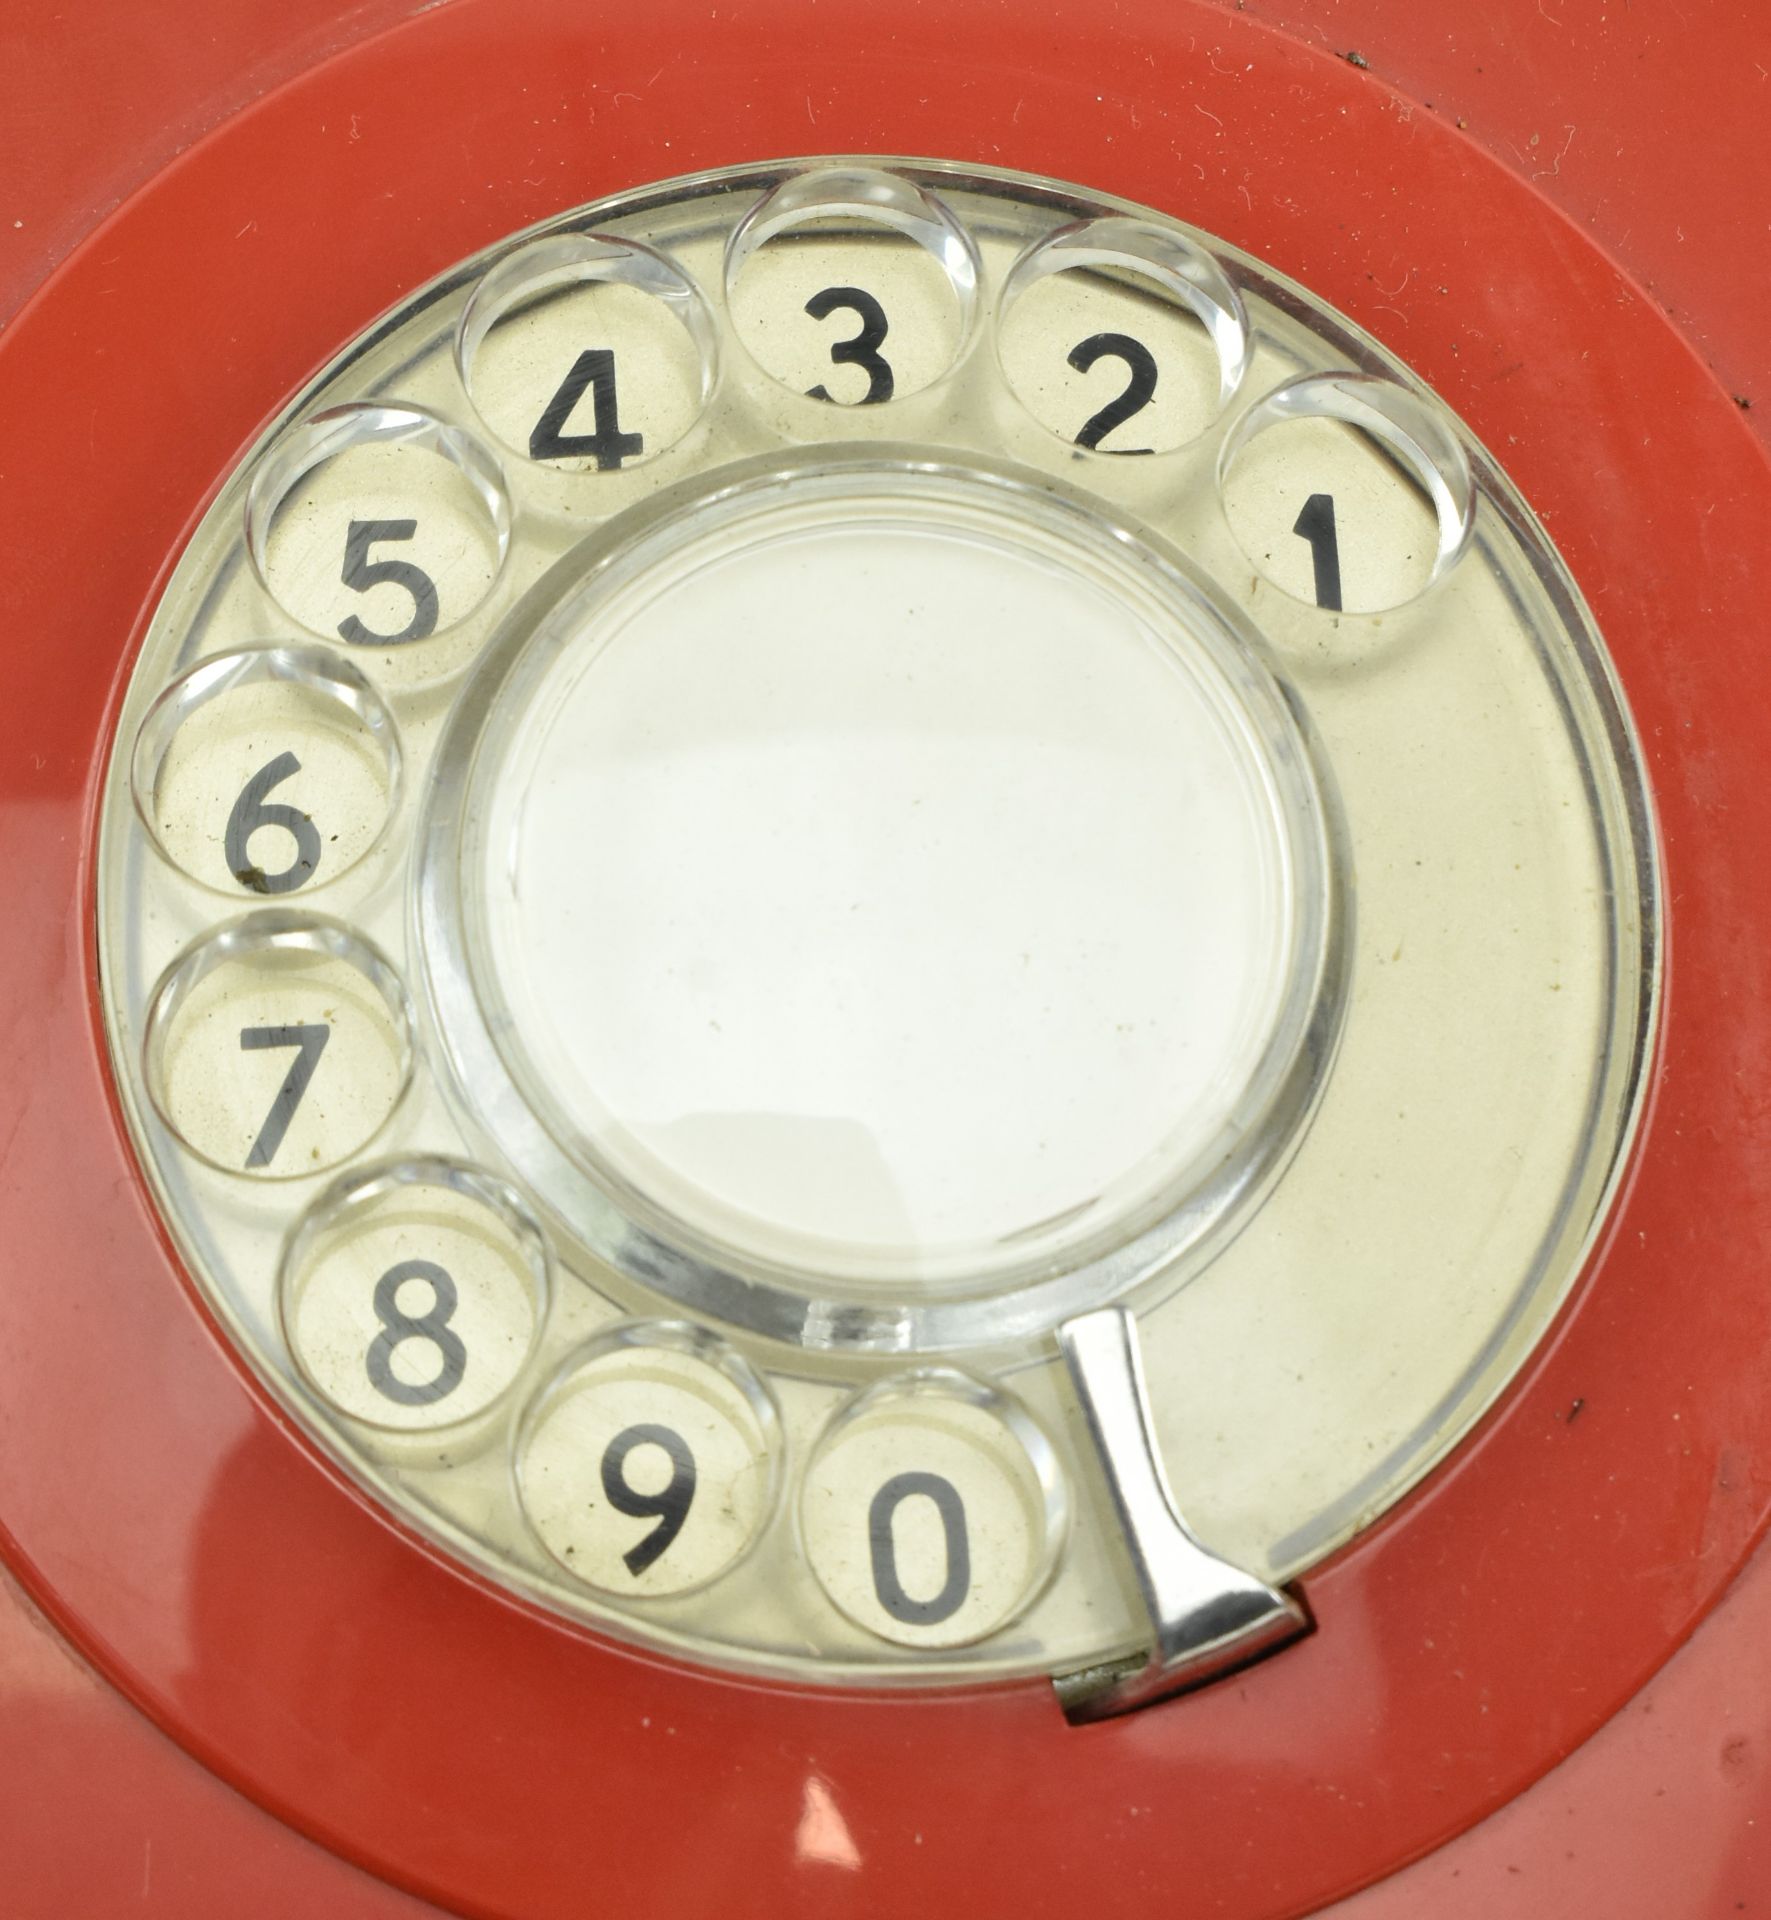 TWO VINTAGE G. P. O. ROTARY DIAL TELEPHONES, ONE RED ONE CREAM - Image 4 of 7